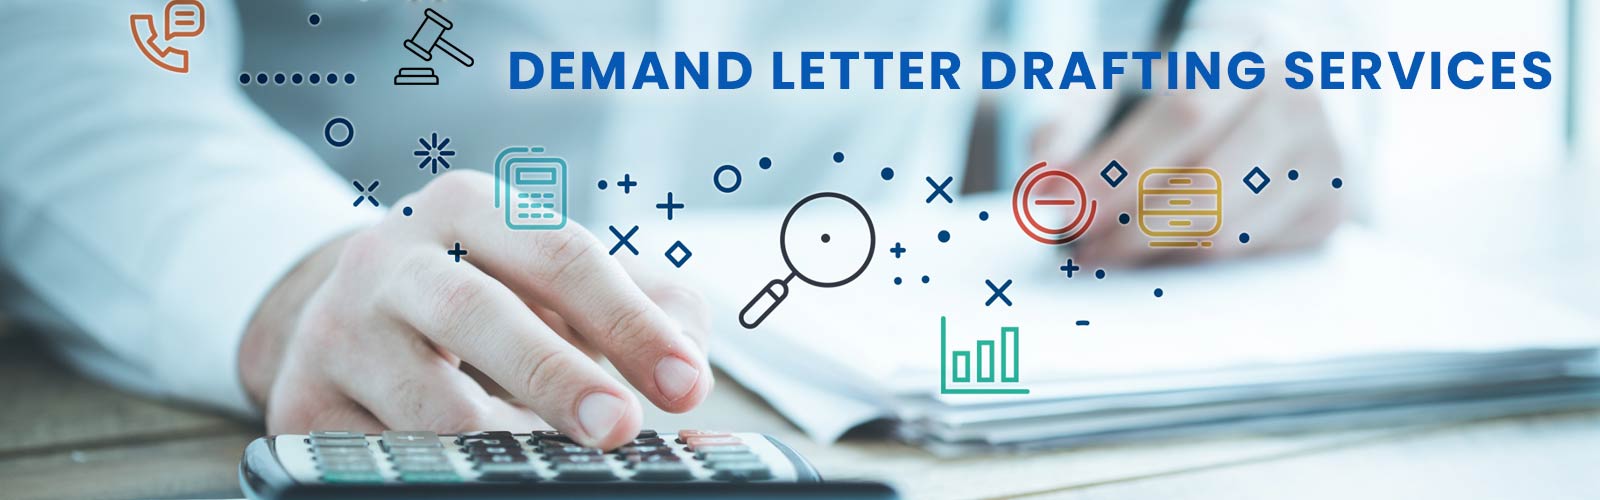 Demand Letter Drafting Services